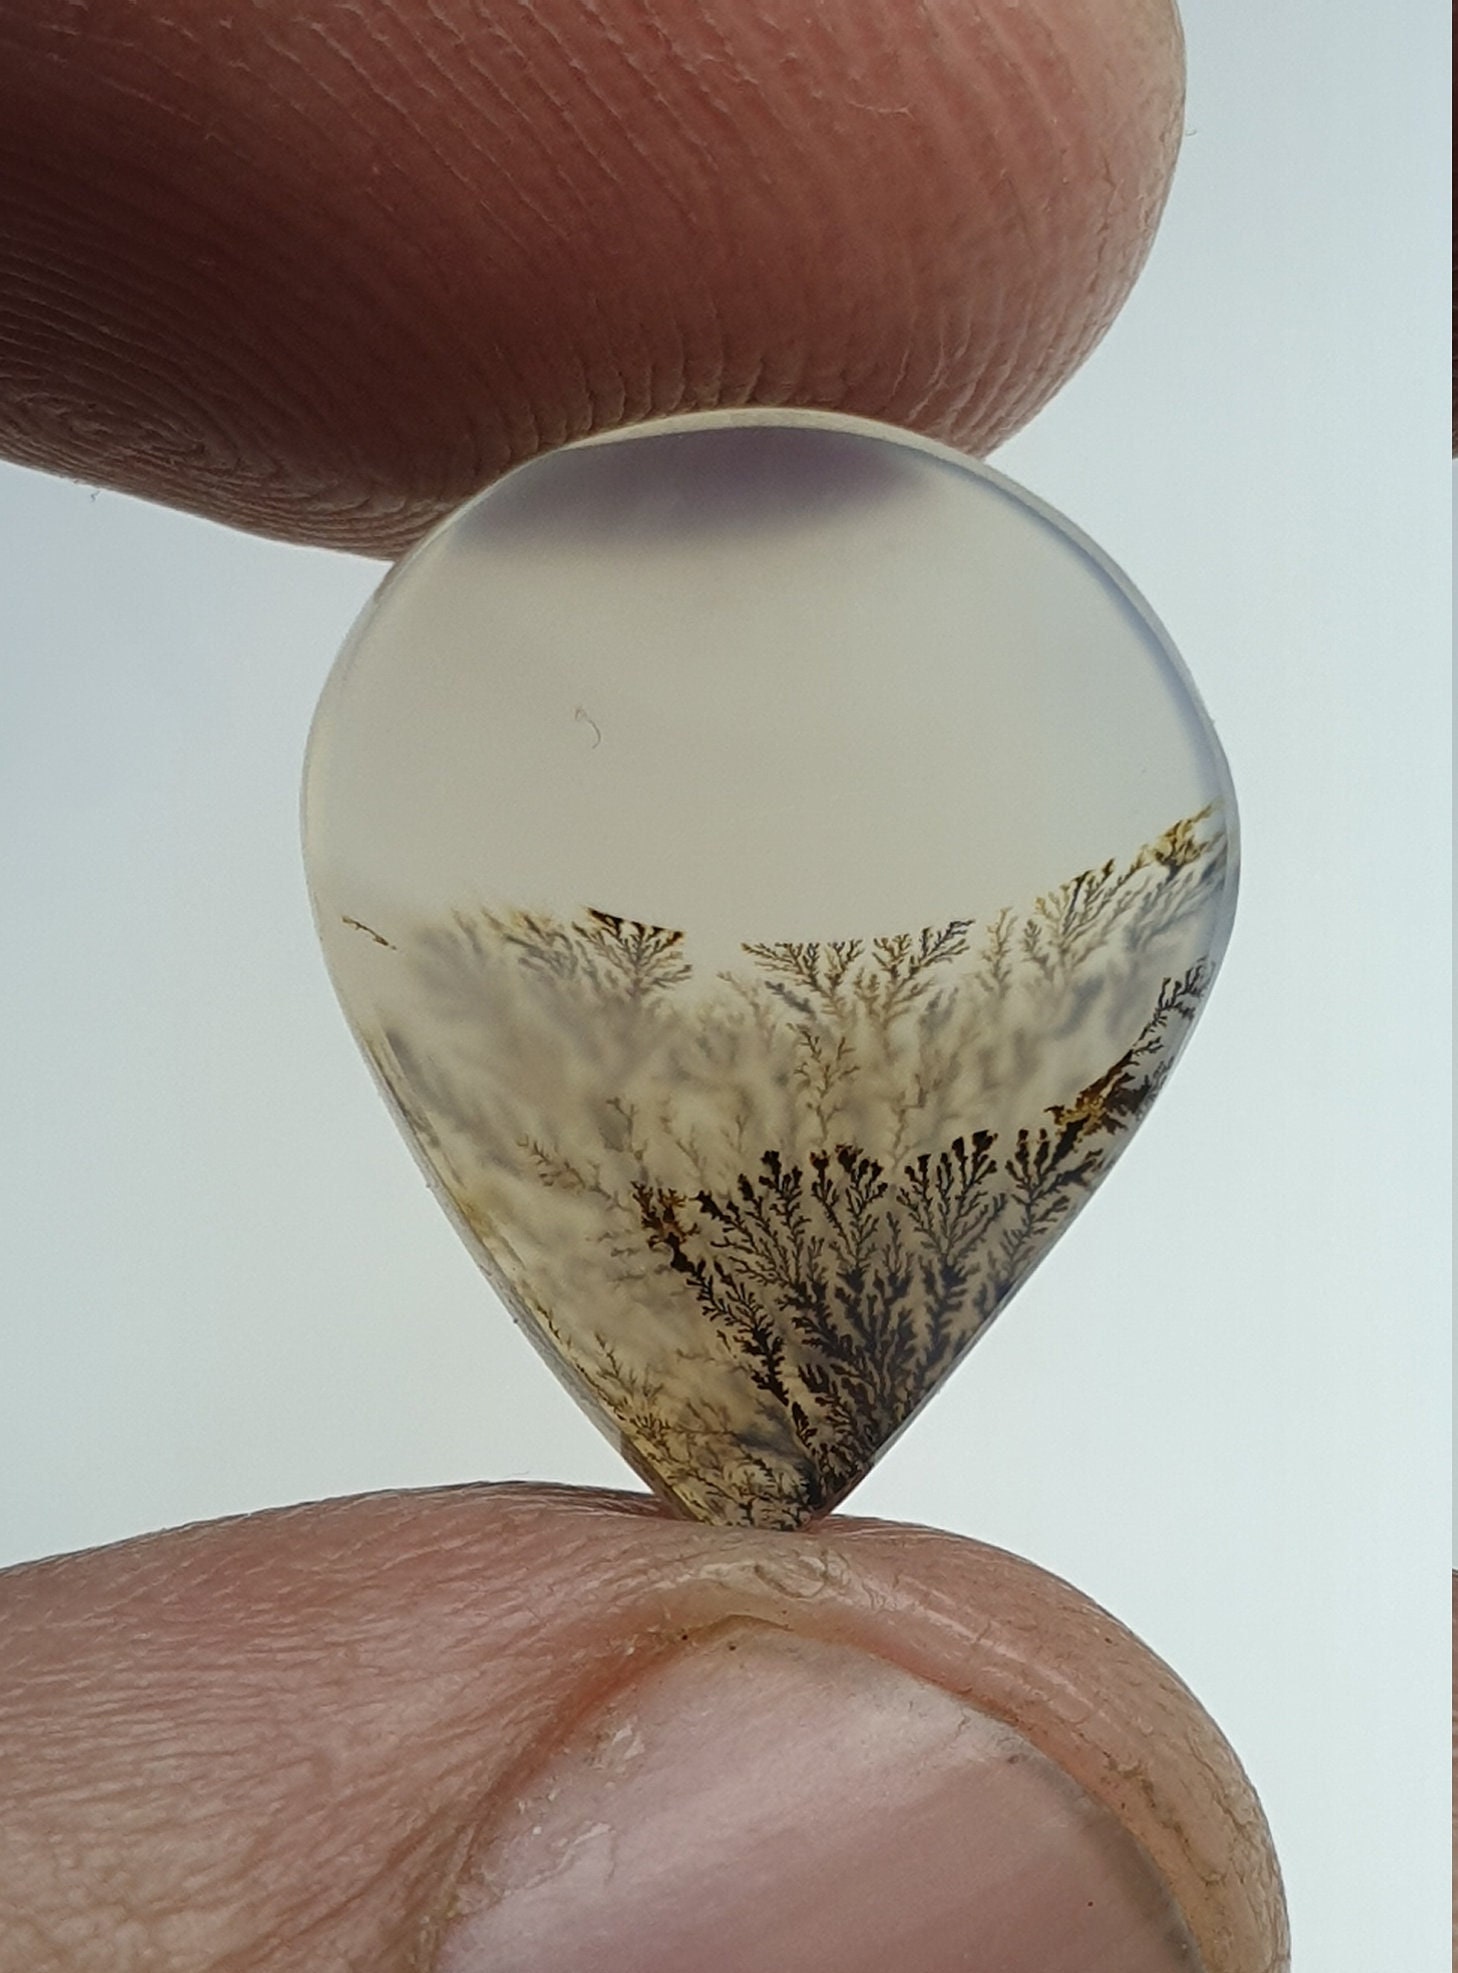 Loose Gemstone Dendritic Agate For Making Jewelry Pendent Size. NATURAL Dendritic Agate Cabochon